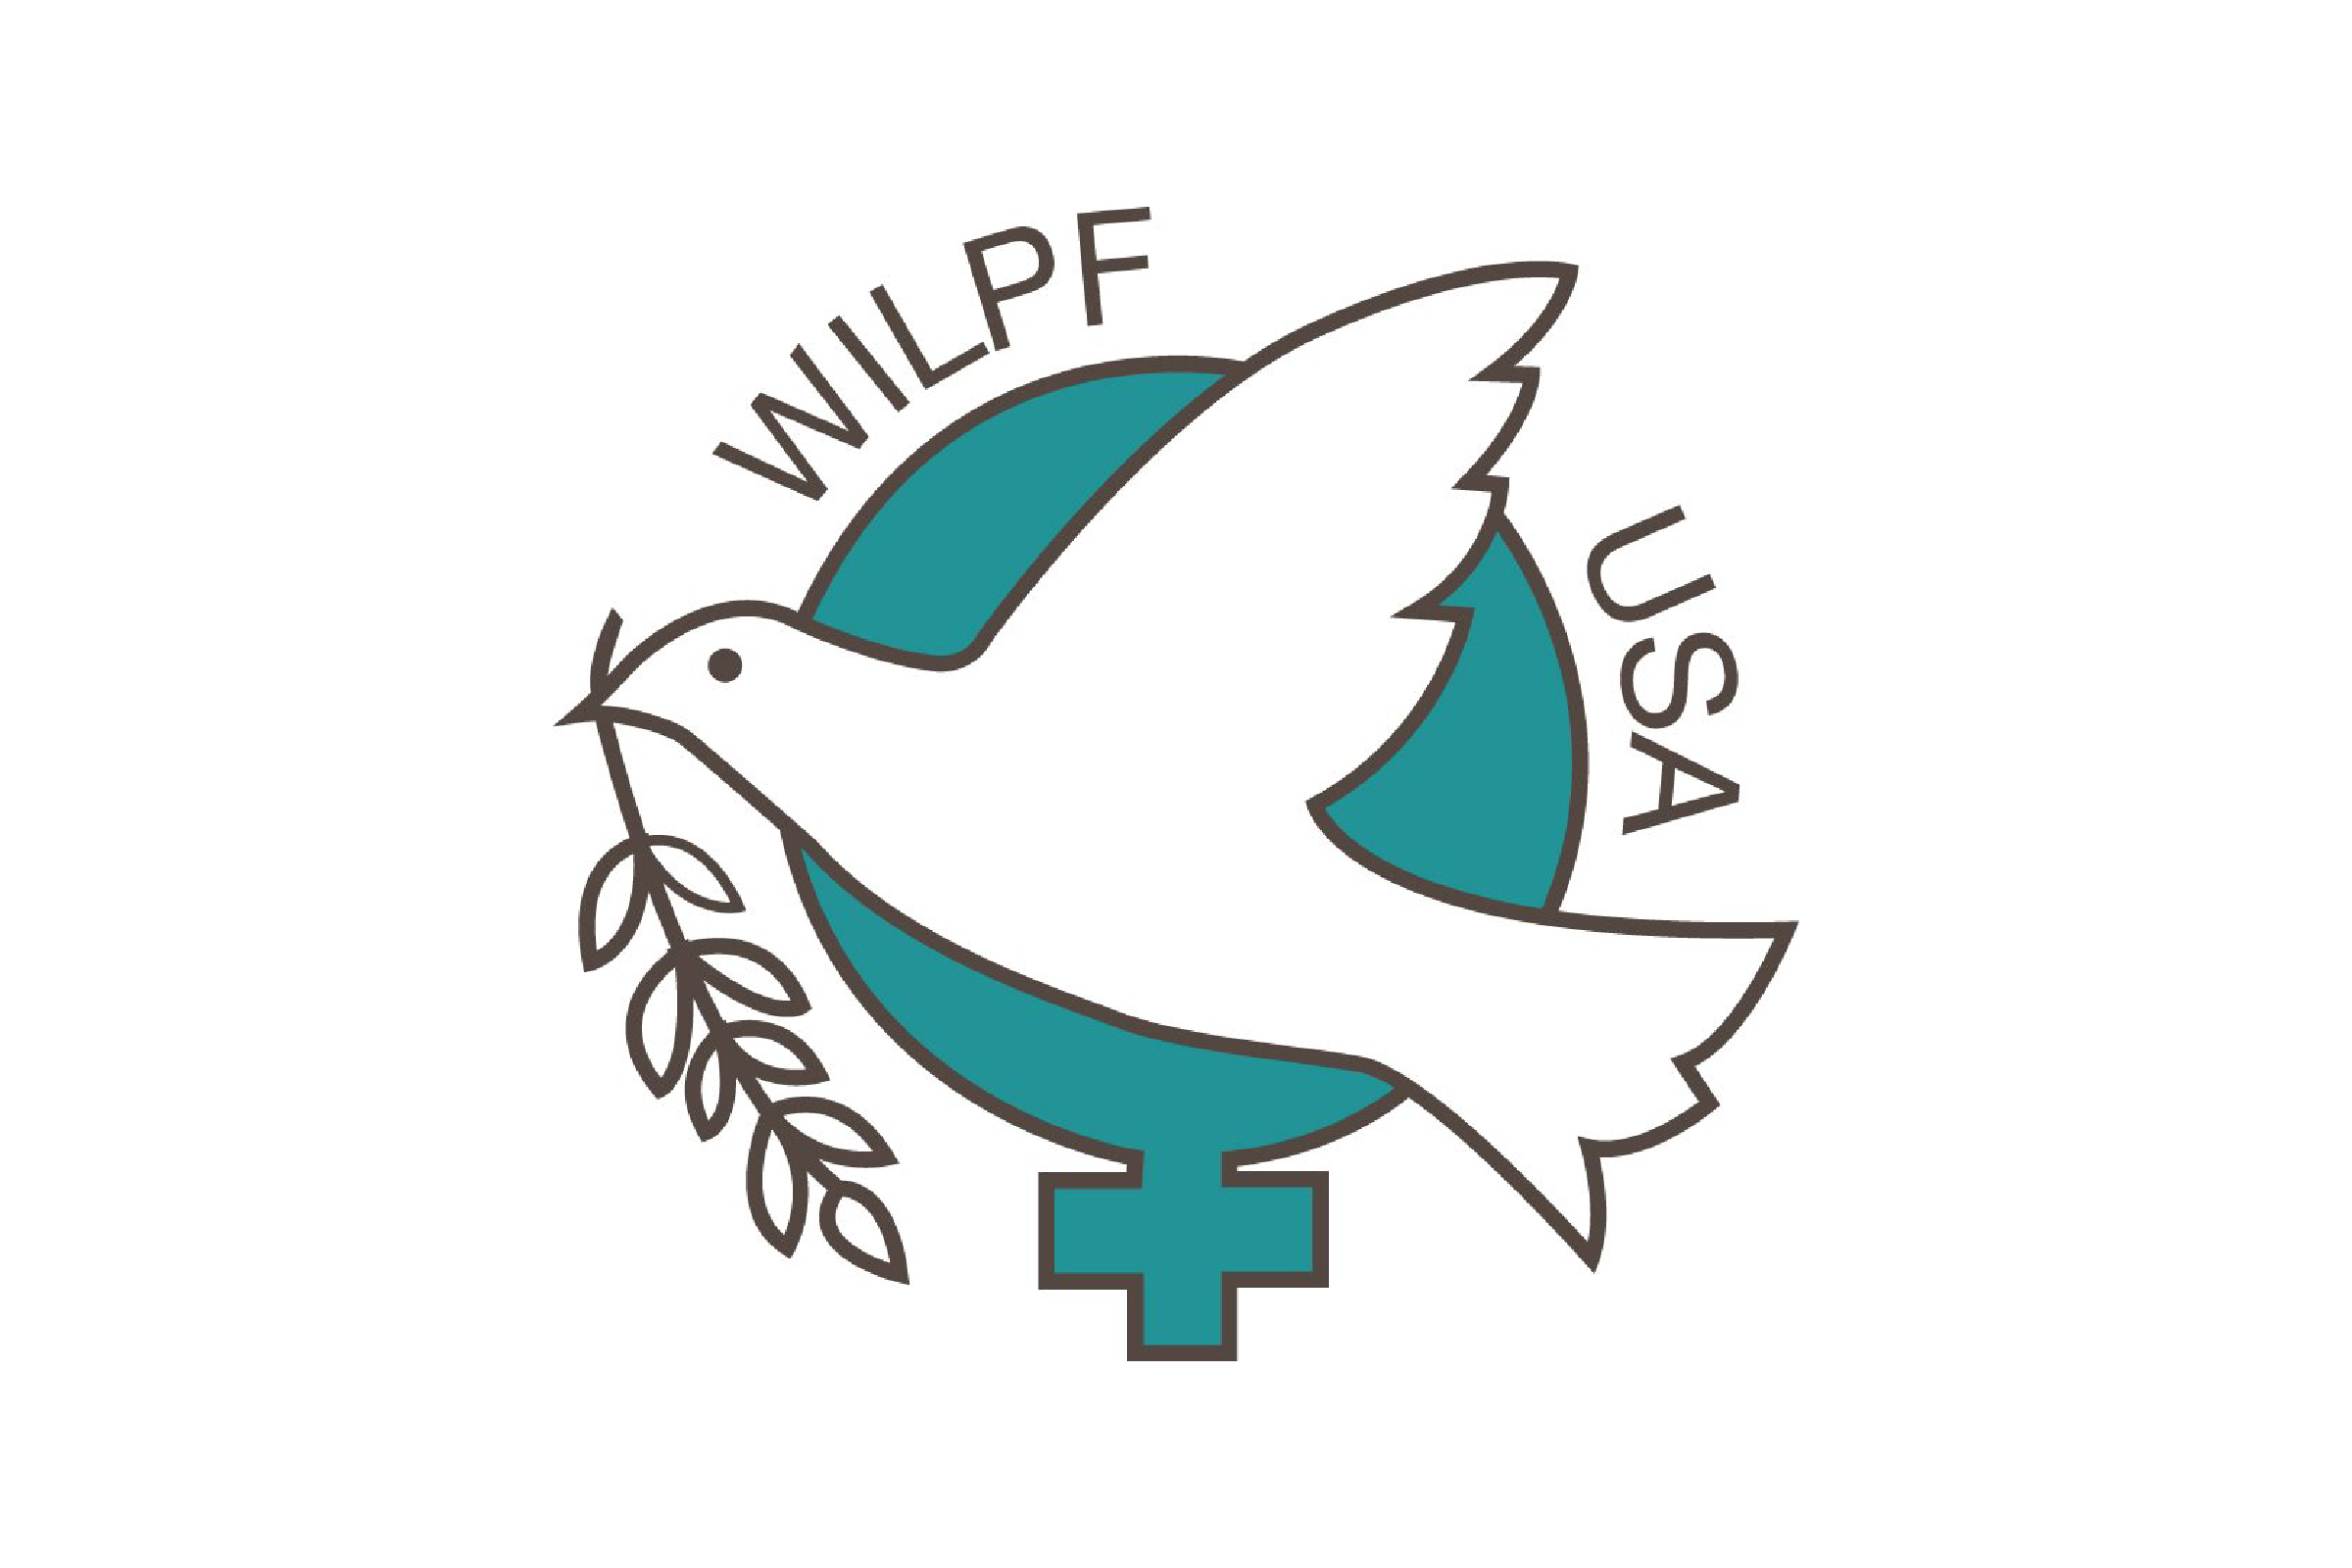 Women’s International League for Peace and Freedom – August 2021